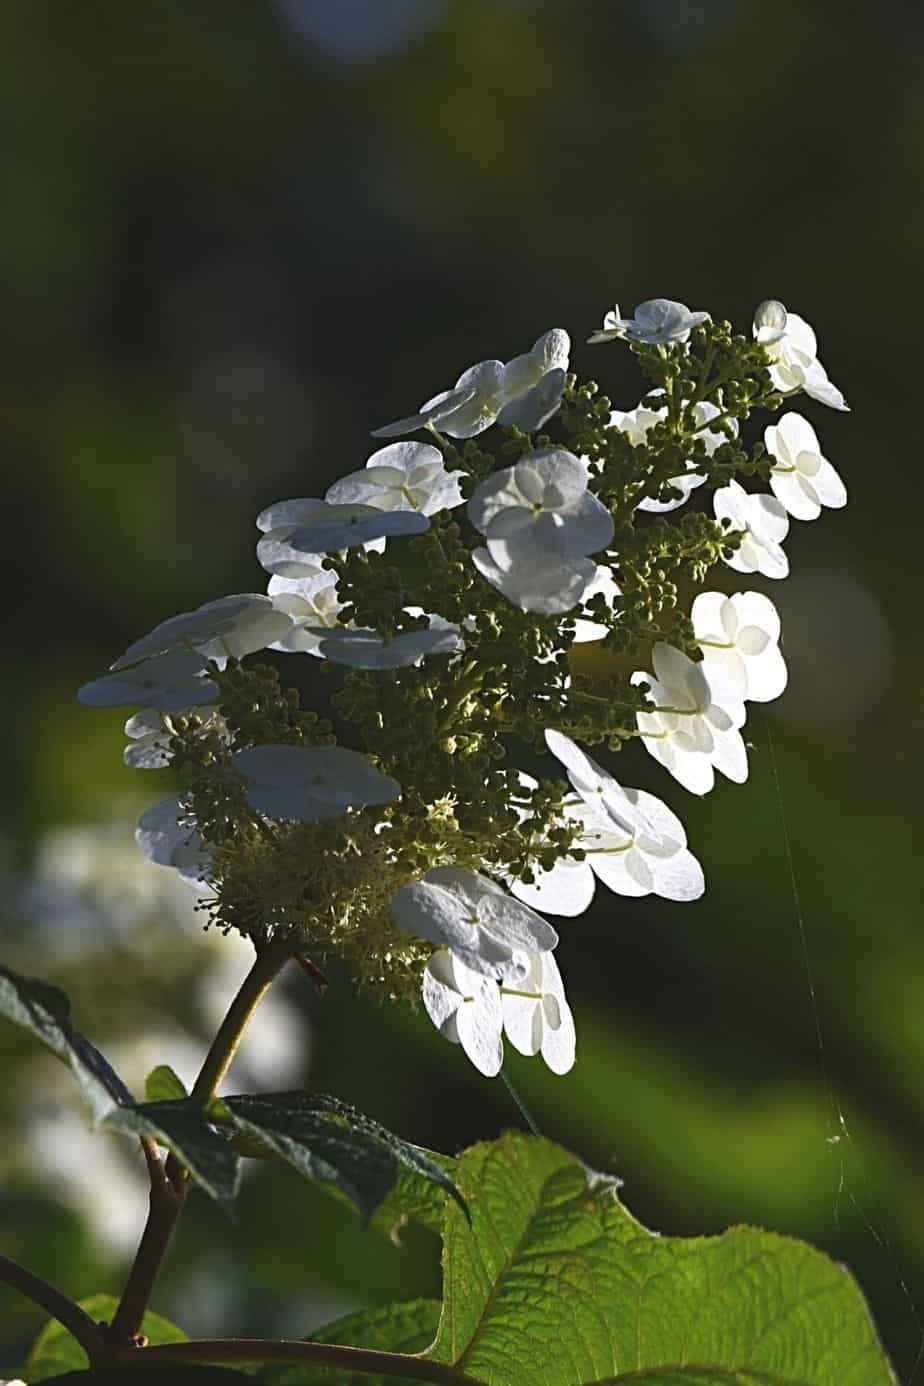 Oakleaf Hydrangea, aka Queen of the Shade, is another stunning plant you can grow on the east-facing side of the house